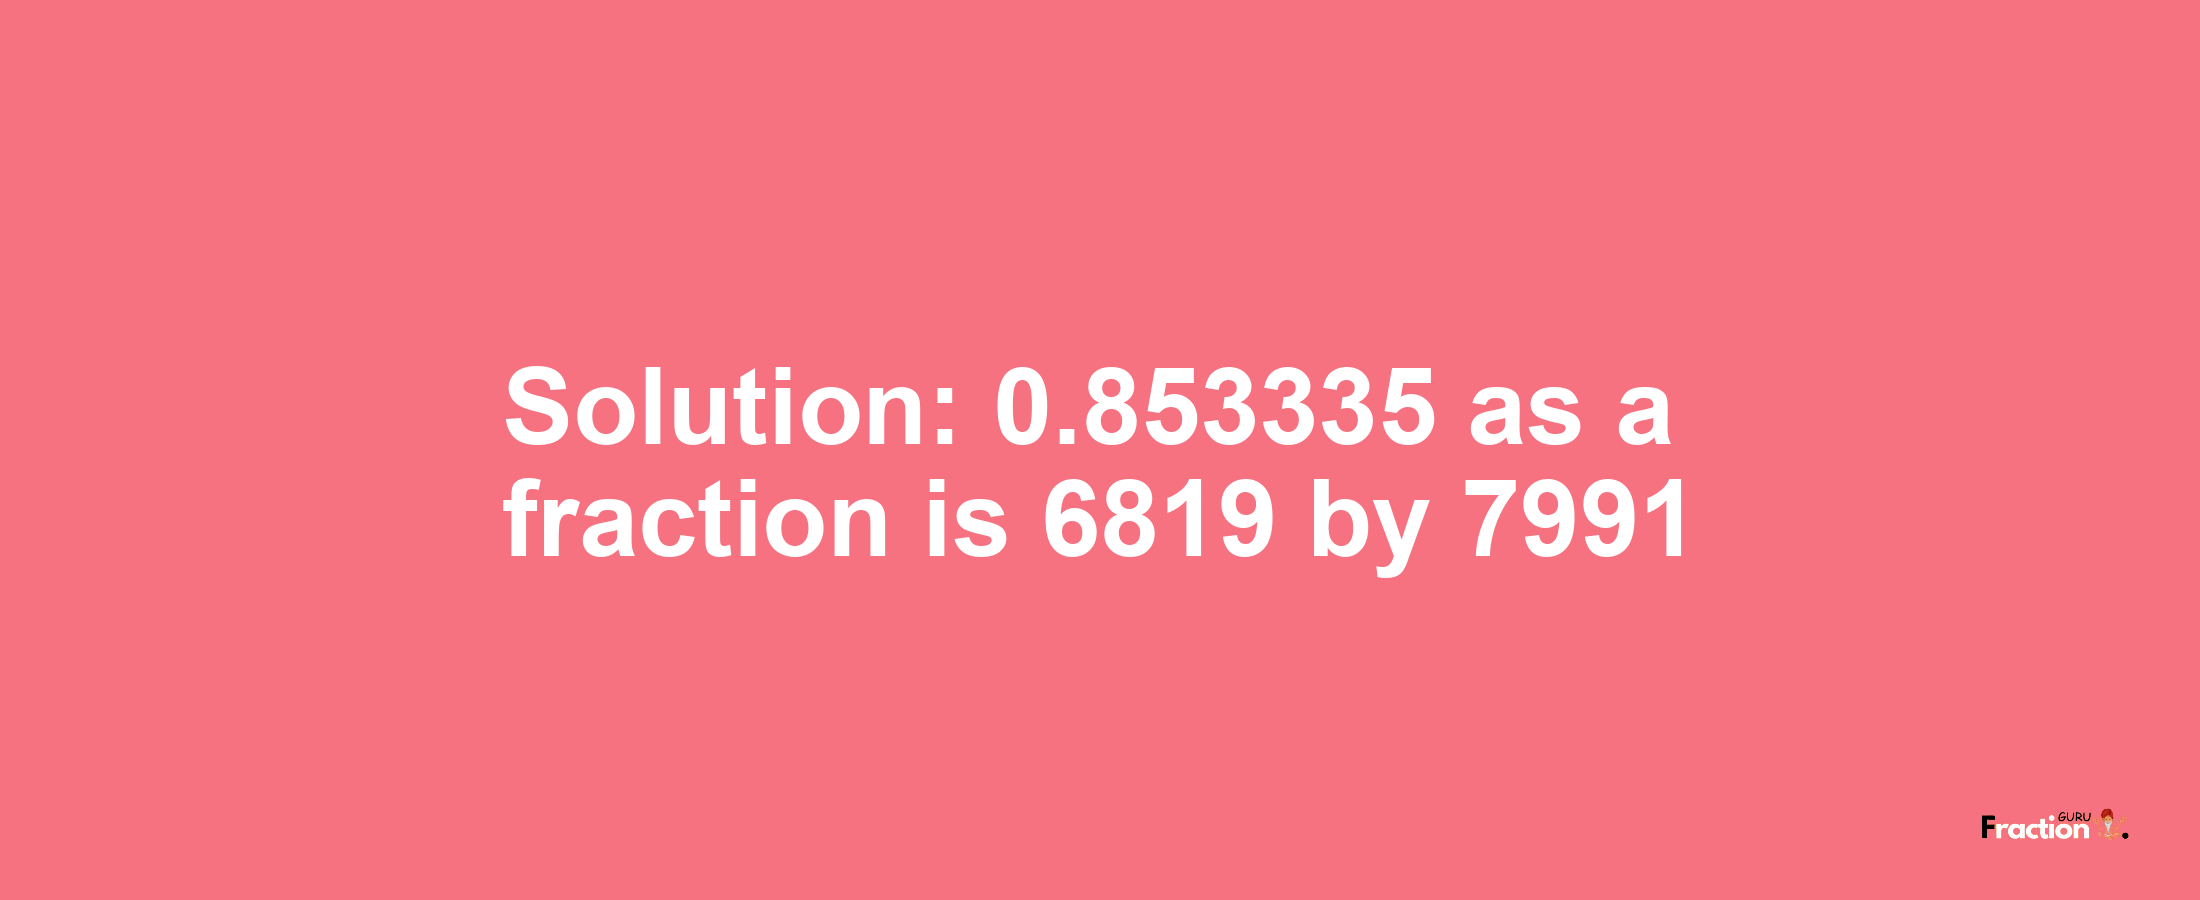 Solution:0.853335 as a fraction is 6819/7991